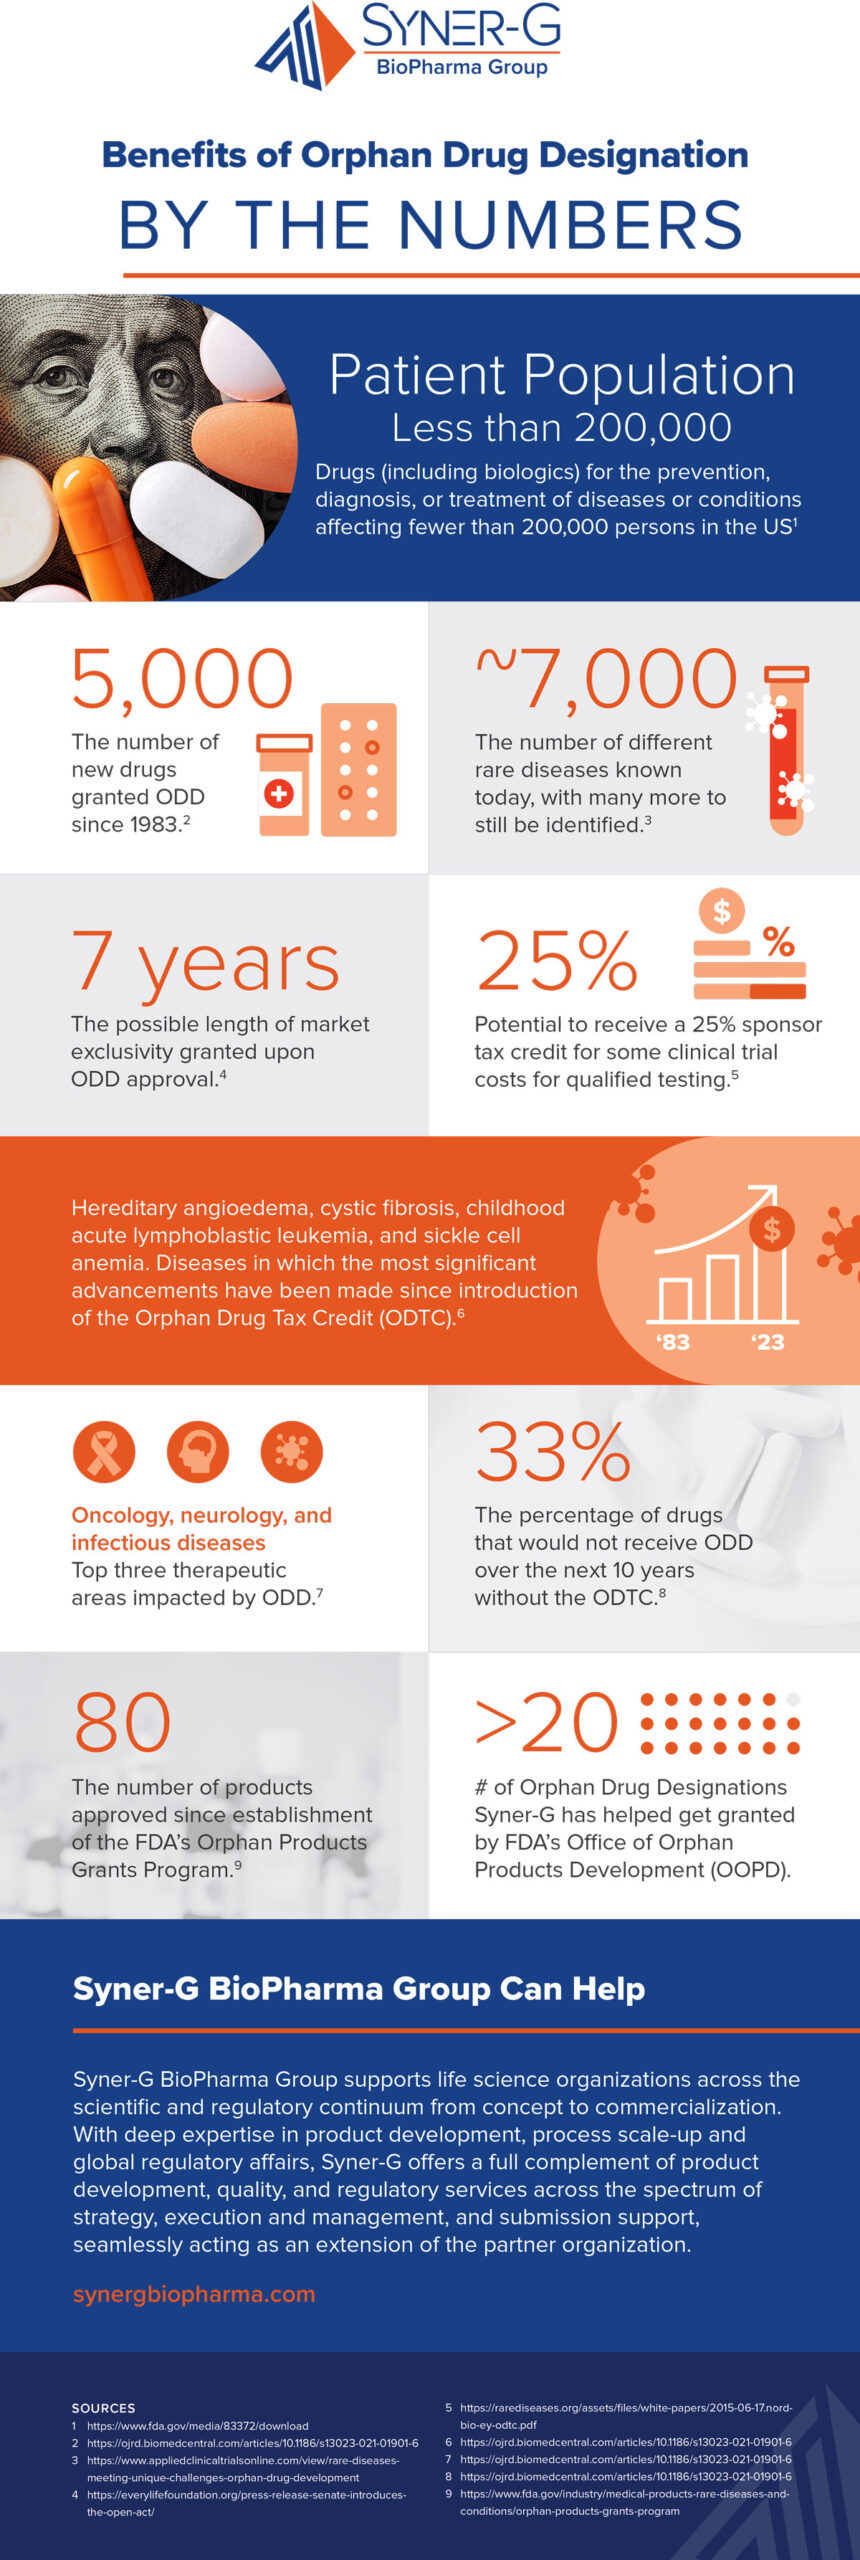 Benefits of Orphan Drug Designation BY THE NUMBERS Infographic